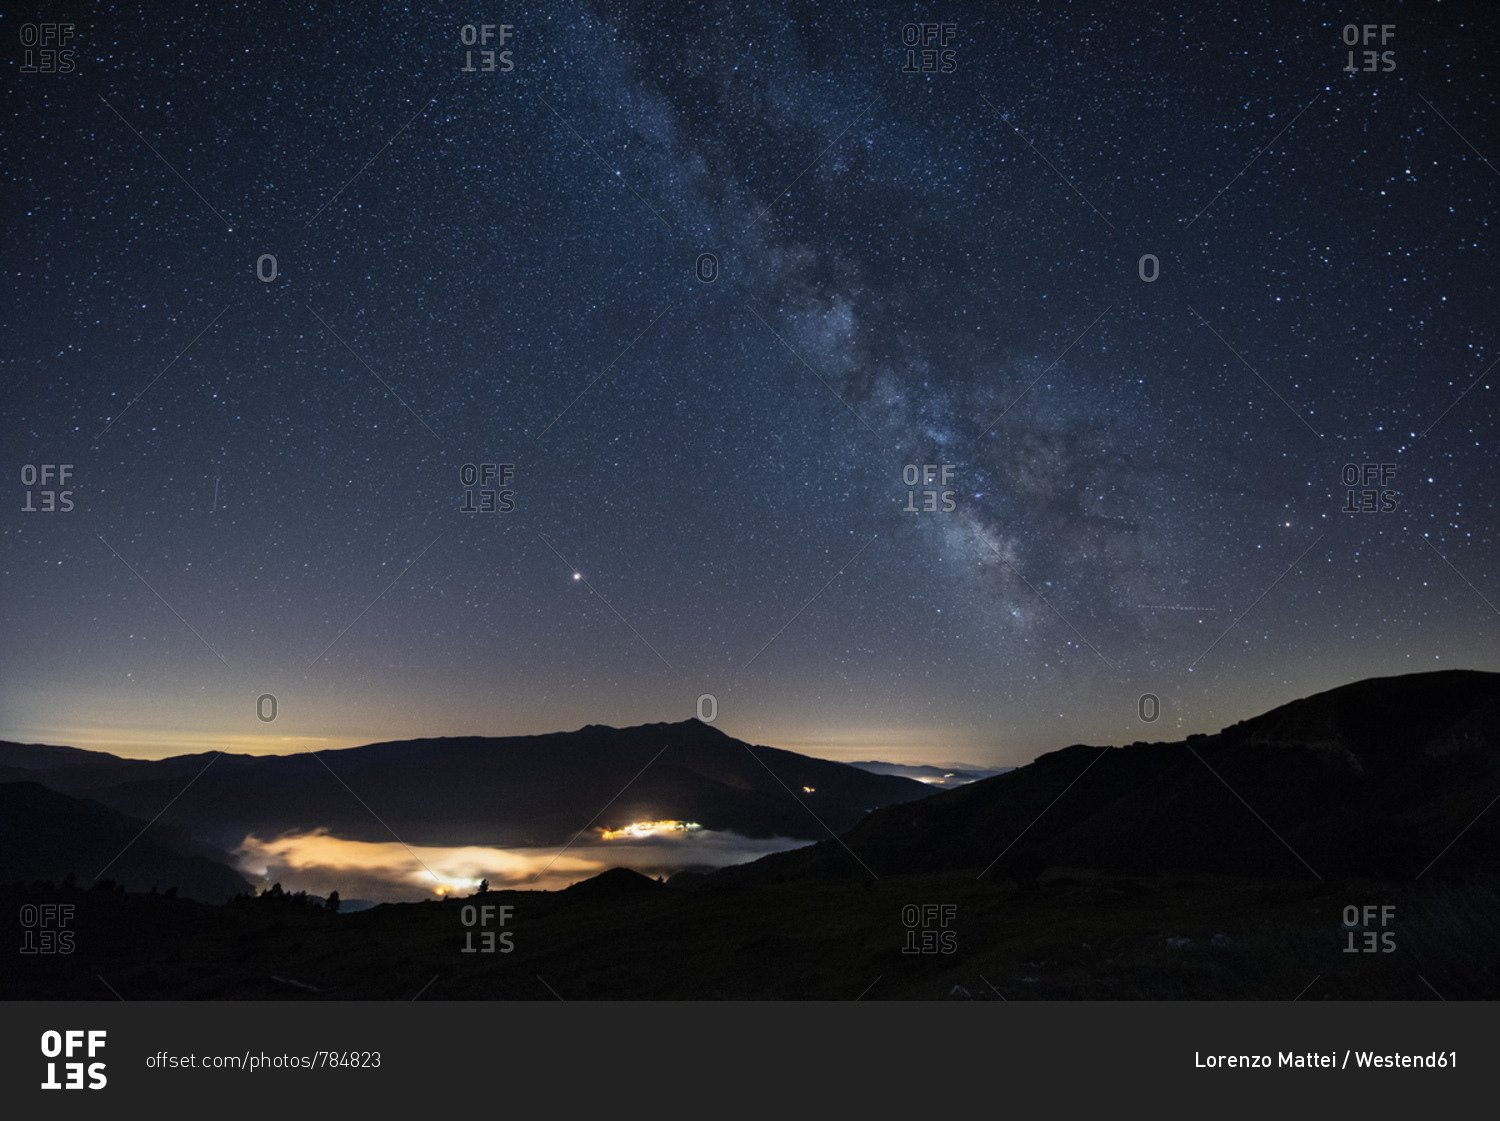 Italy- Umbria- Sibillini National Park- Milky Way over Sibillini mountains at night